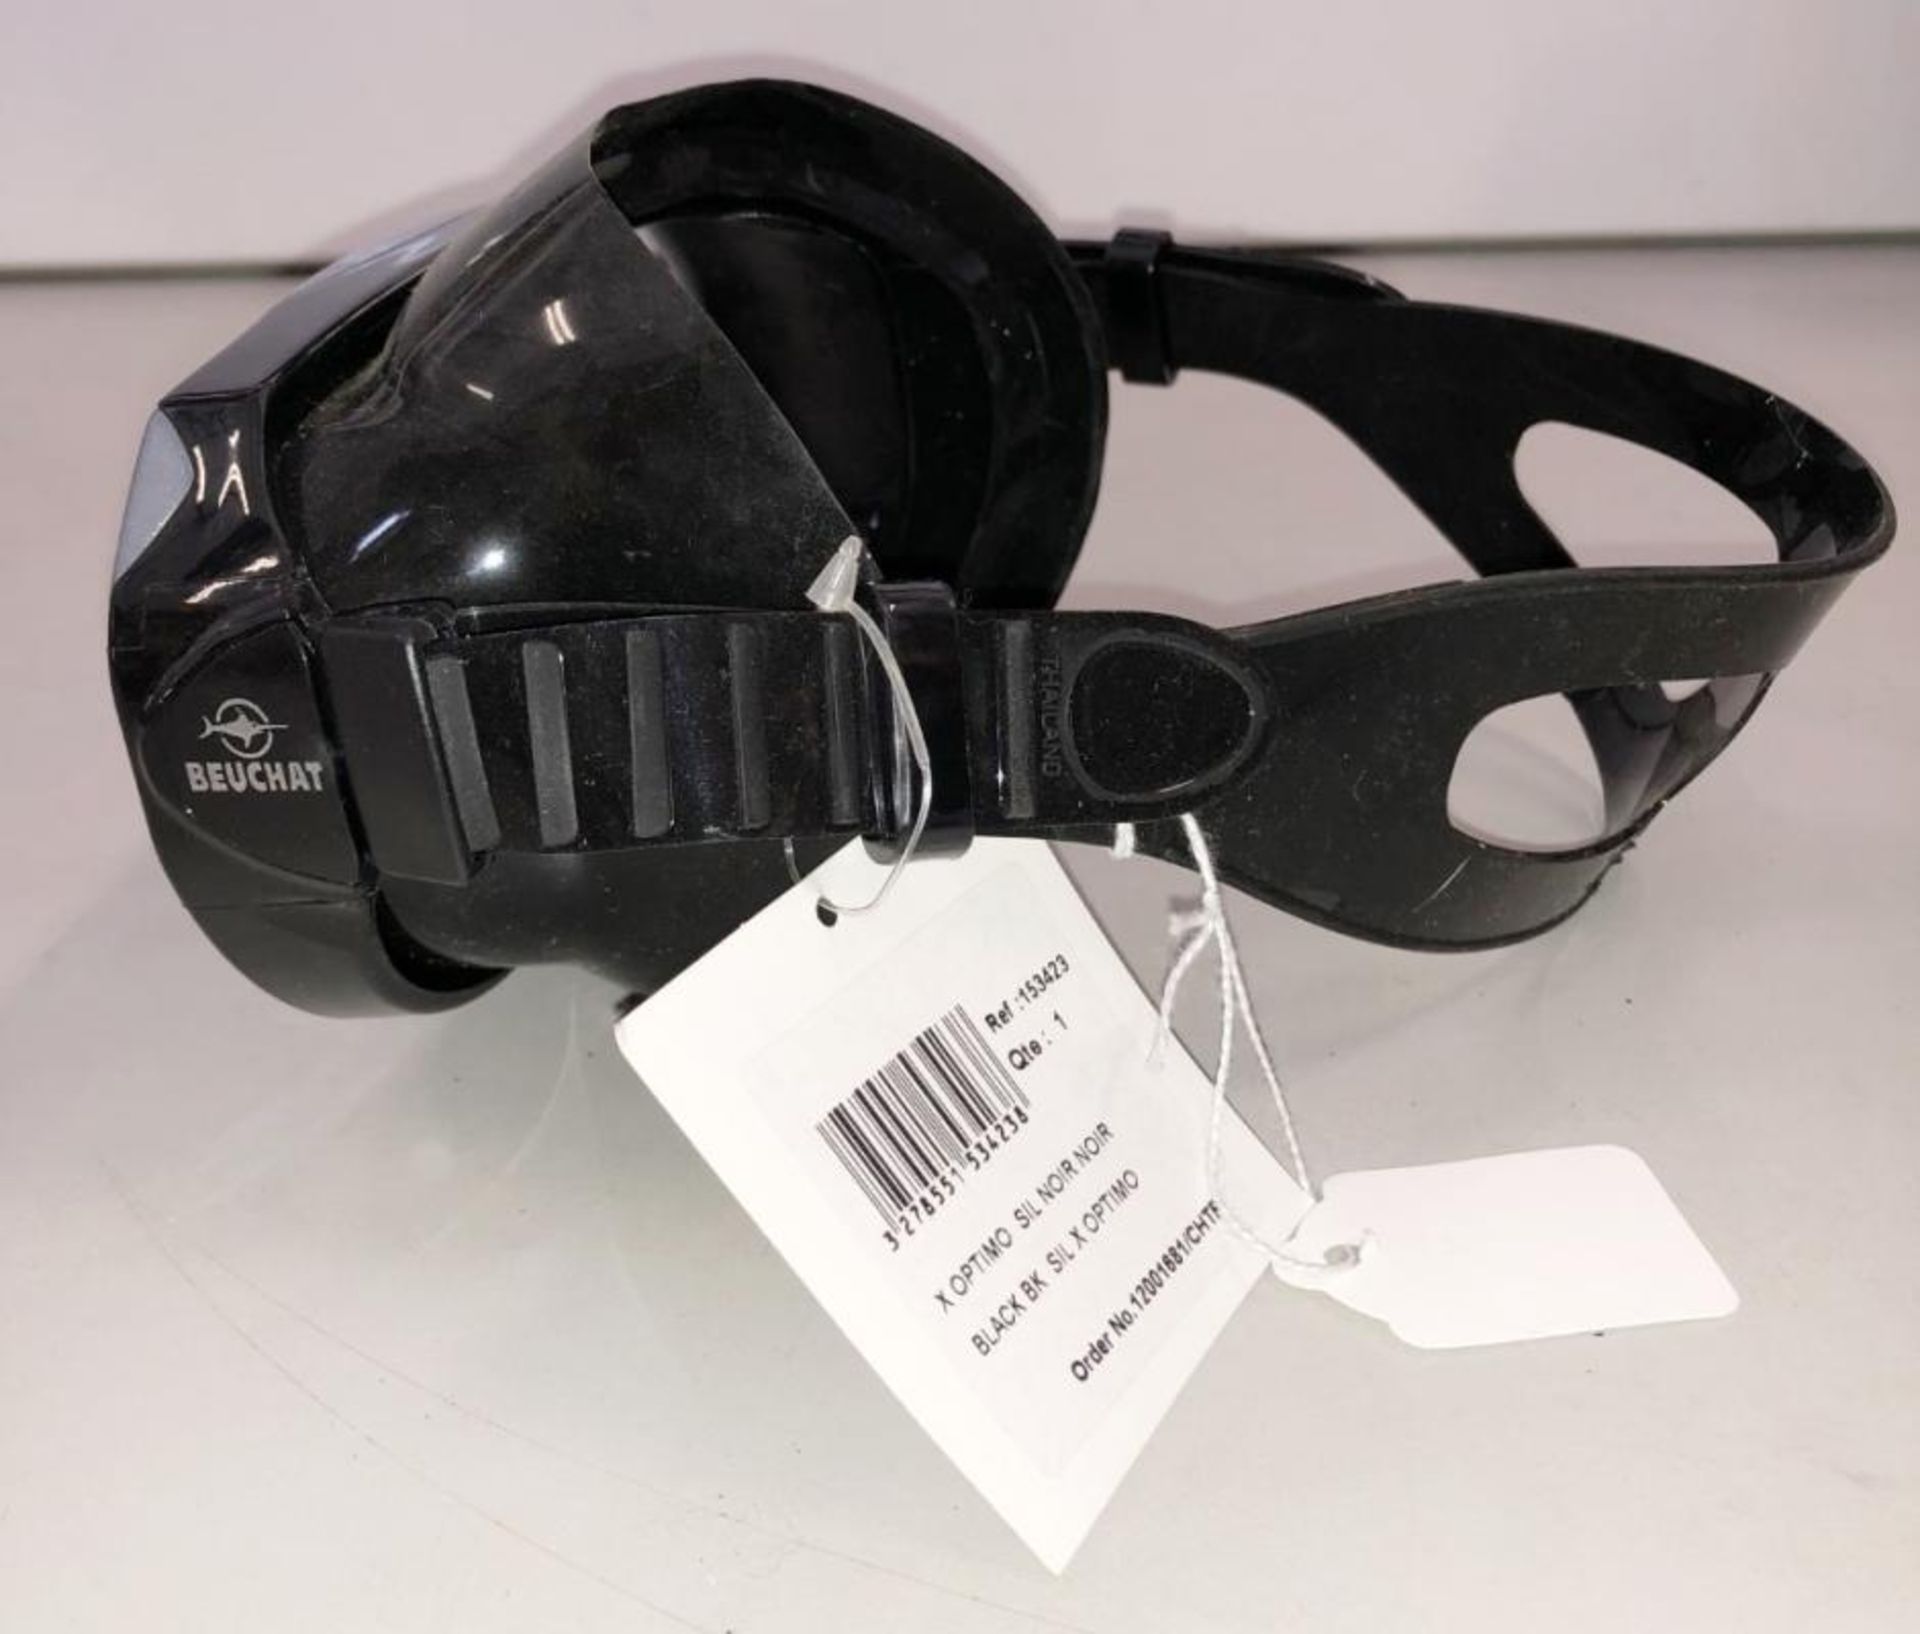 6 x New Branded Diving Masks - CL349 - Altrincham WA14 - Total RRP £187.44 - Image 15 of 20